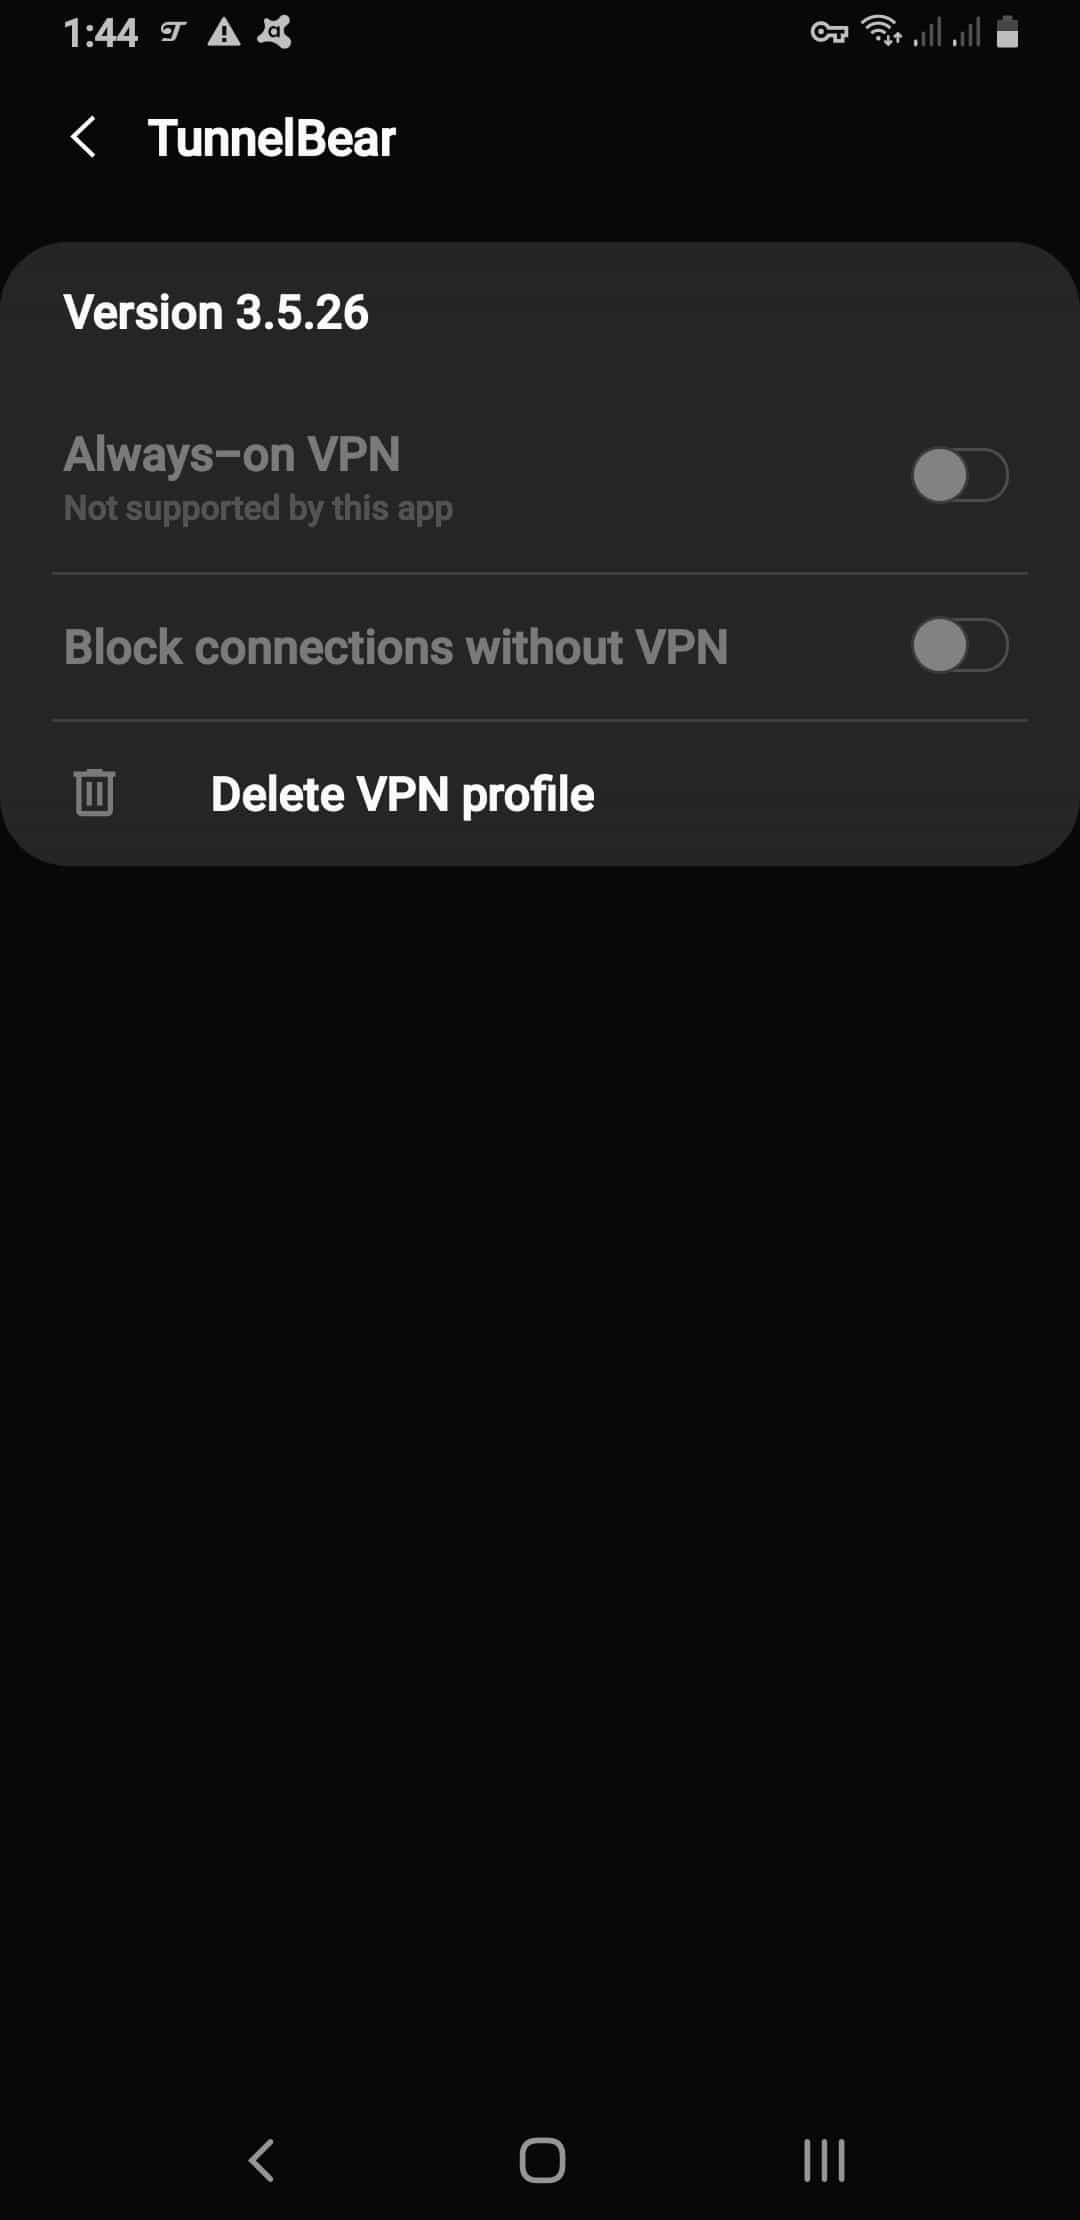 Activating Always-on VPN if supported